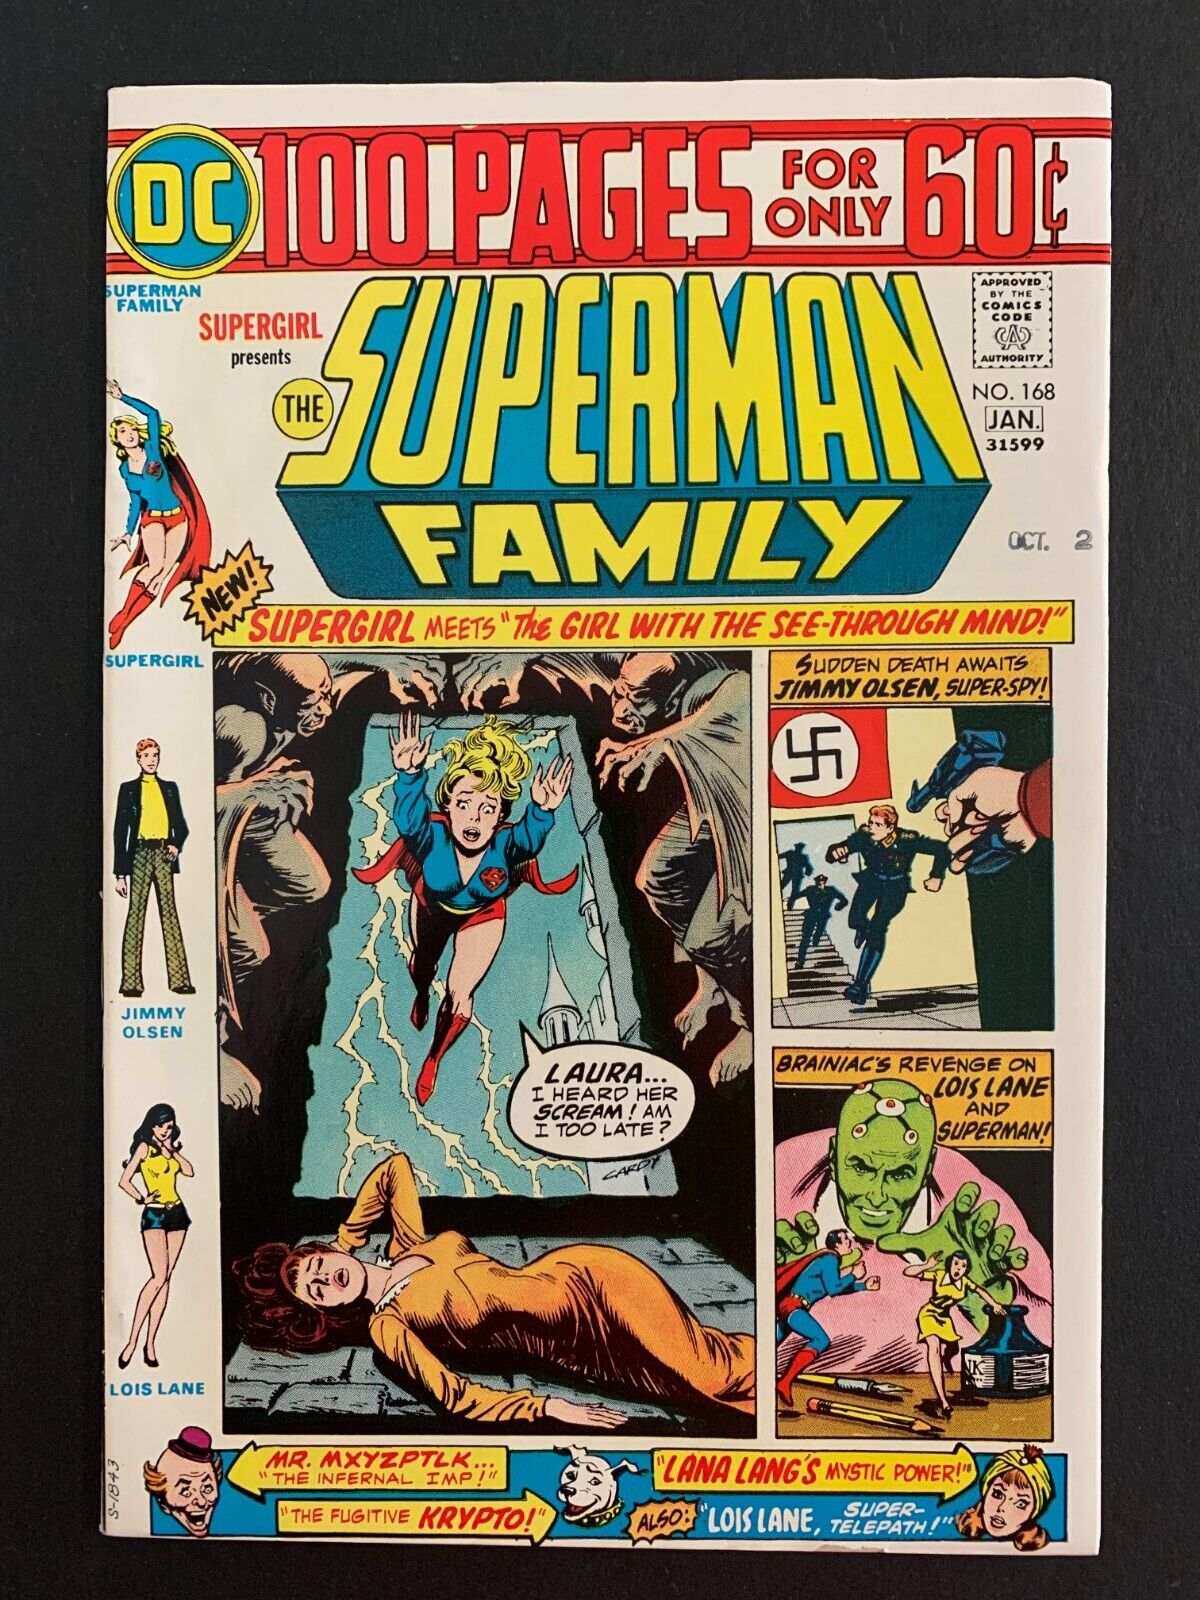 SUPERMAN FAMILY #168 *SHARP!* (DC, 1975)  100 PAGE GIANT!  LOTS OF PICS!